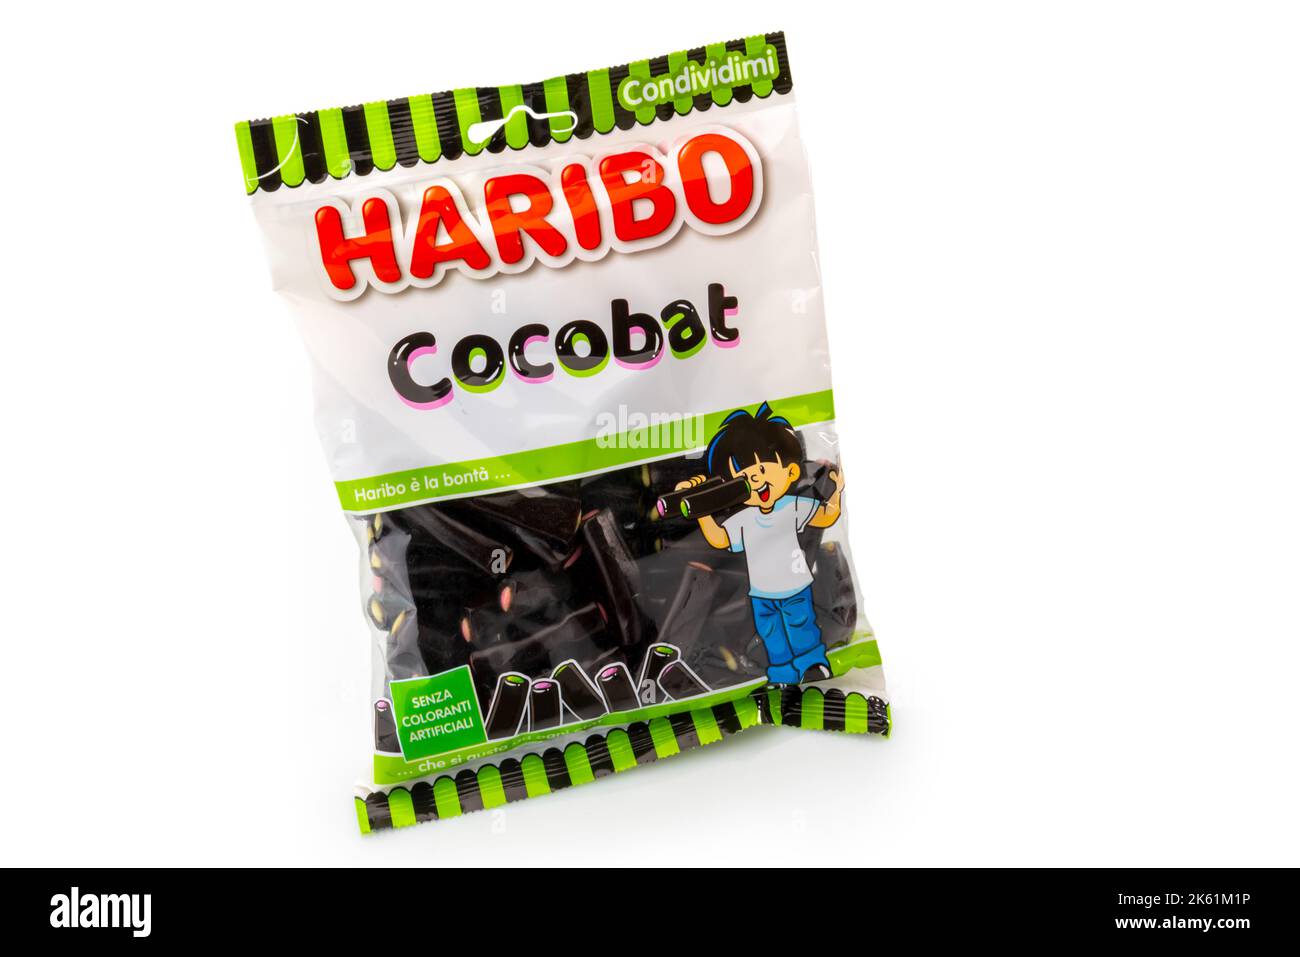 Turin, Italy - July 01, 2022: Haribo Cocobat Licorice Candies filled with fruit flavors, italian package isolated on white Stock Photo